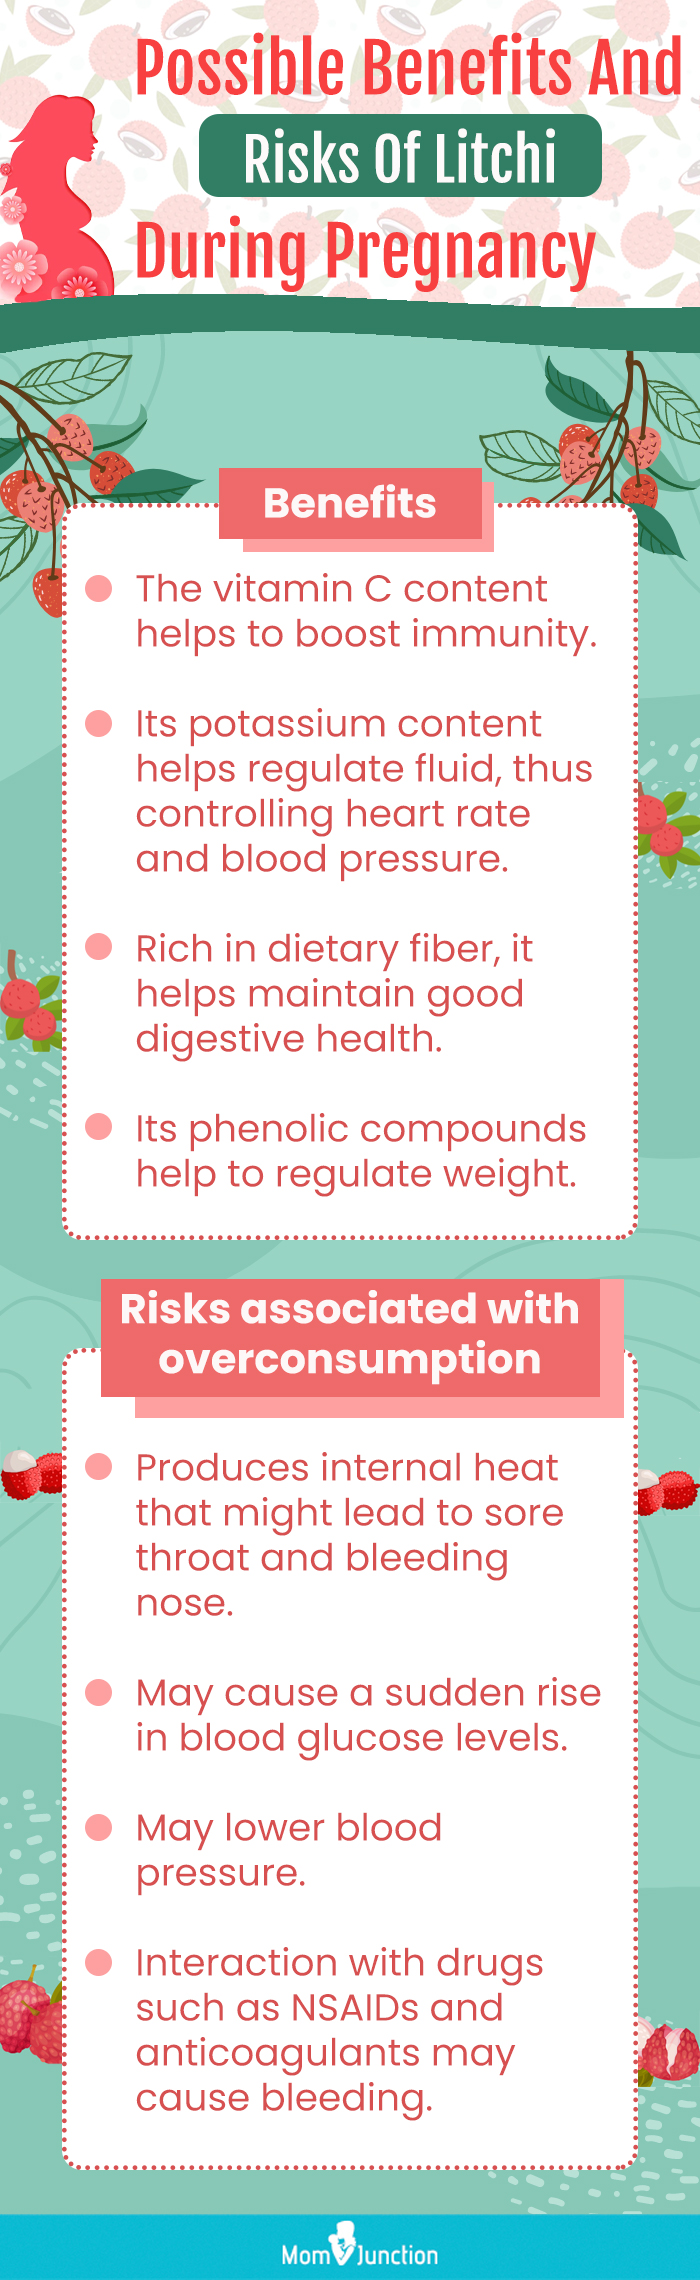 possible benefits and risks of litchi during pregnancy (infographic)